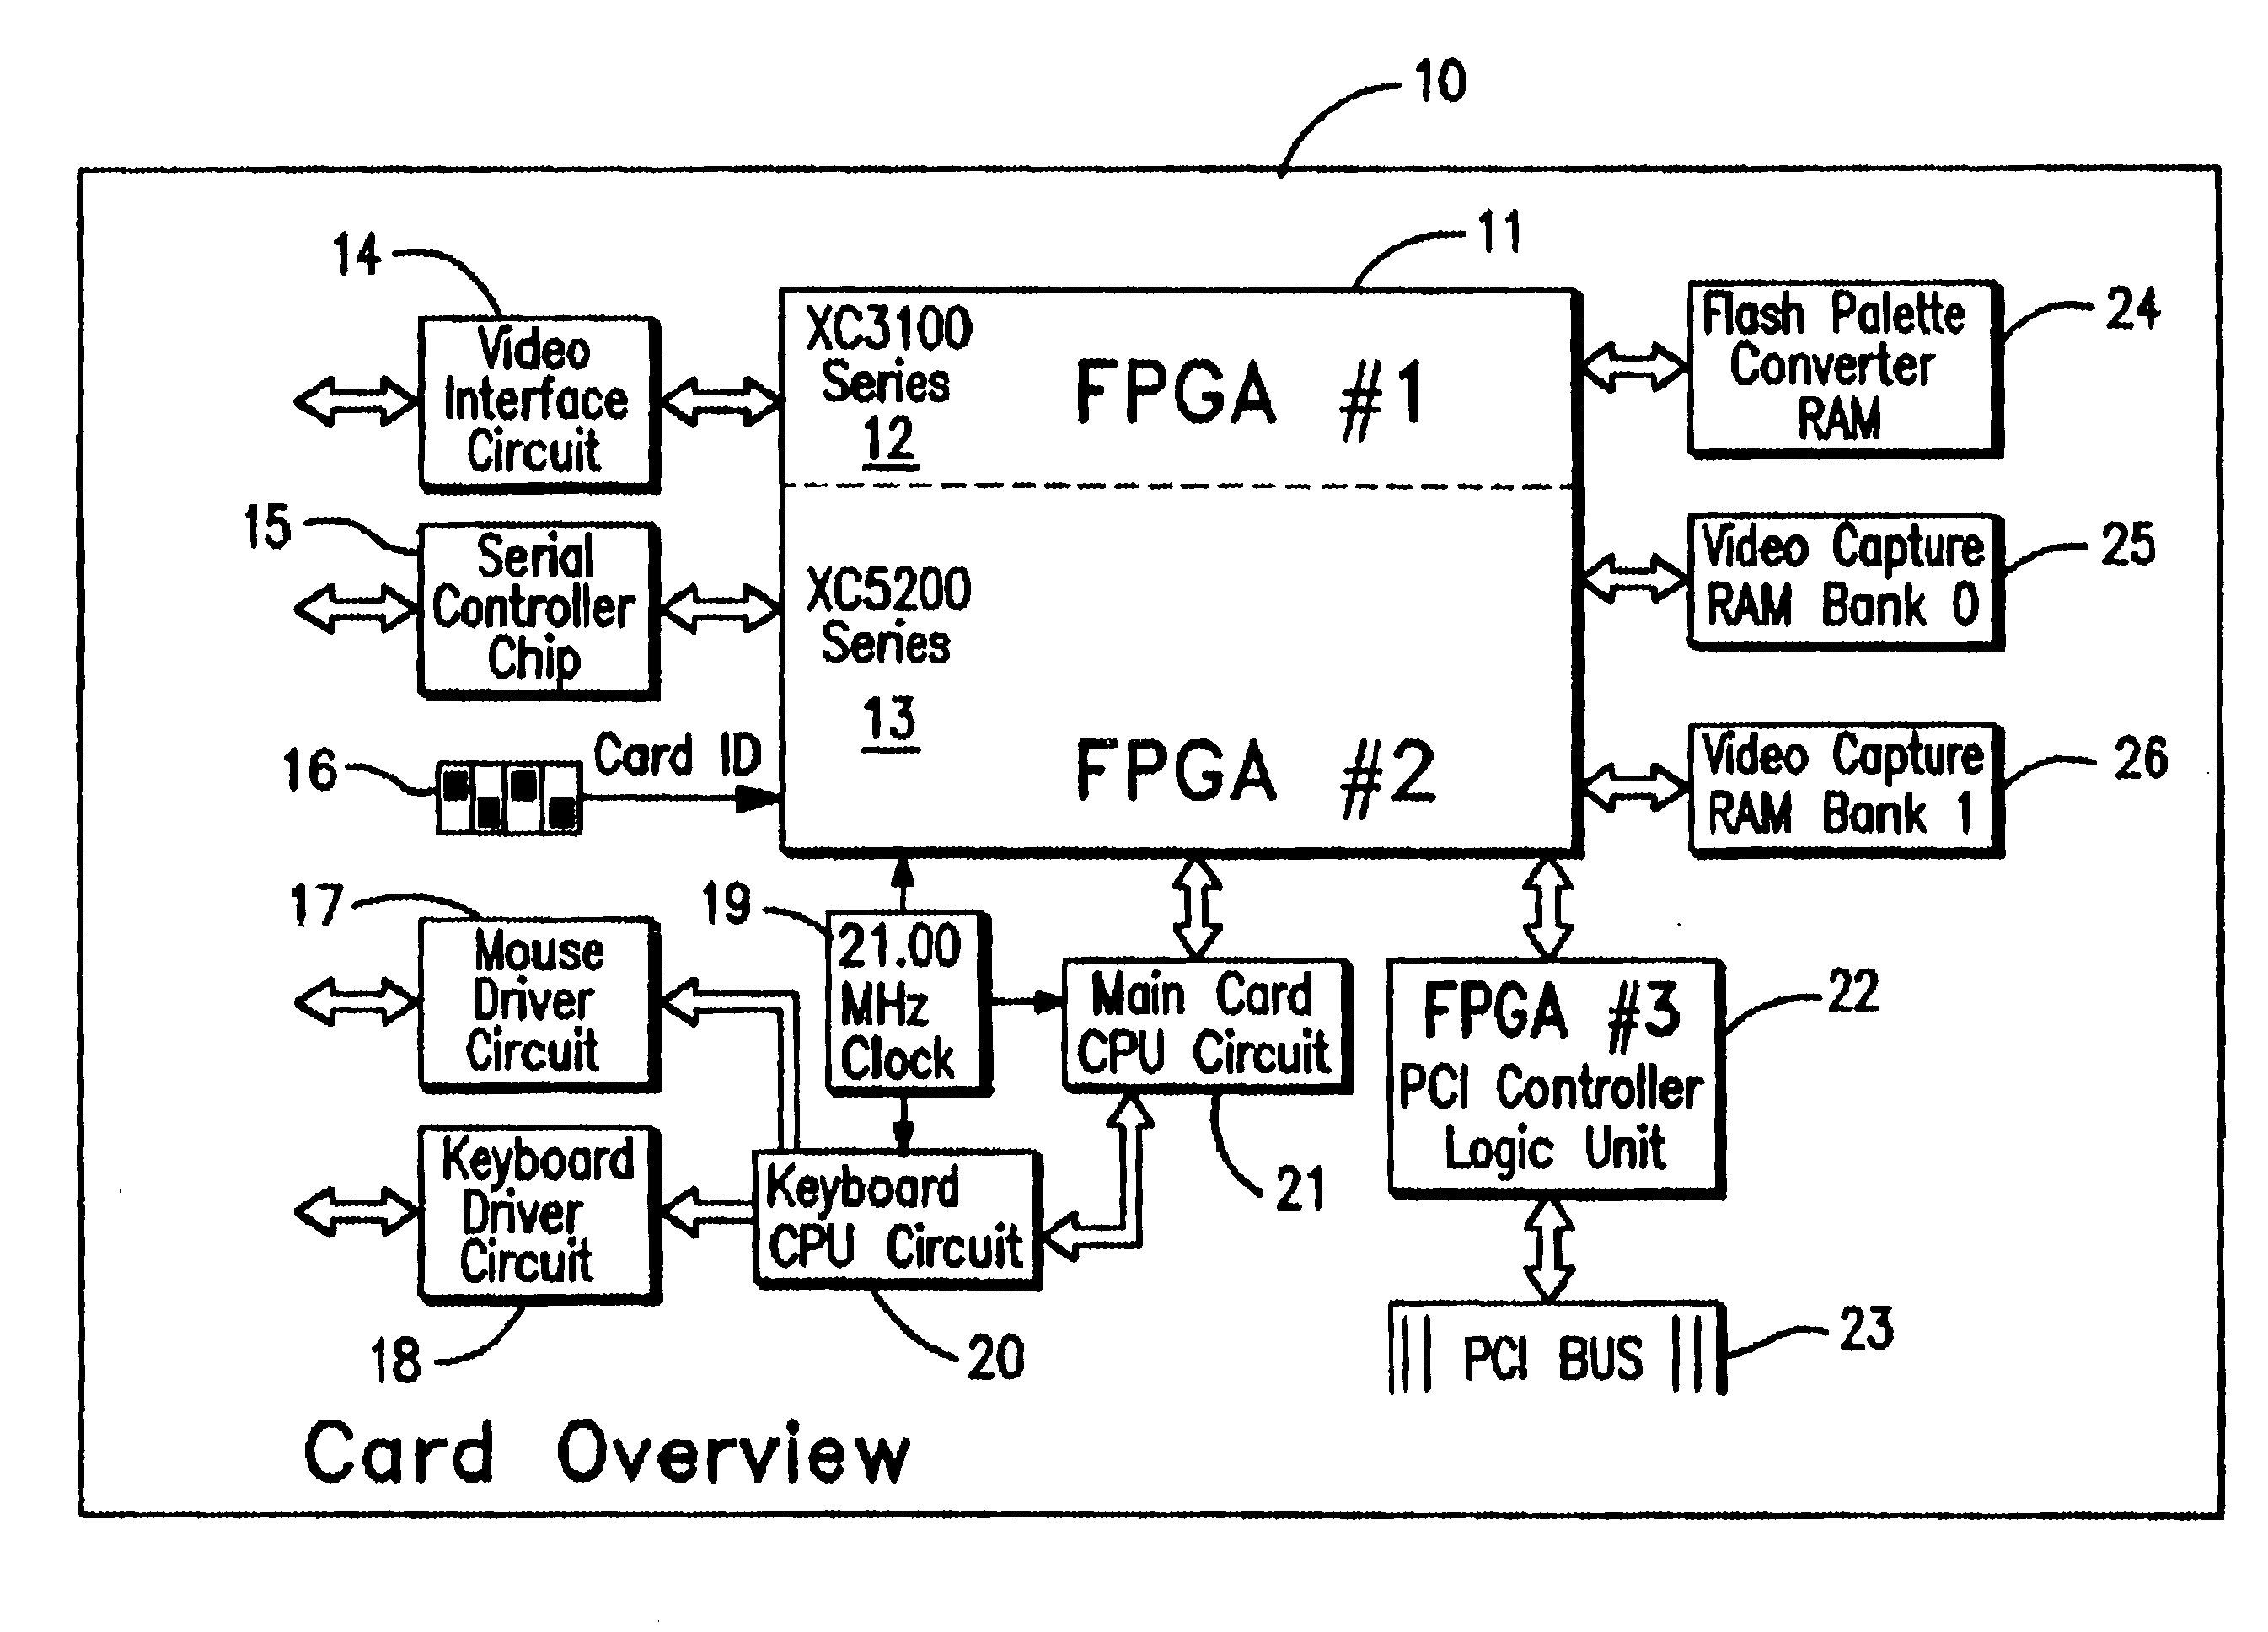 System and method for accessing and operating personal computers remotely